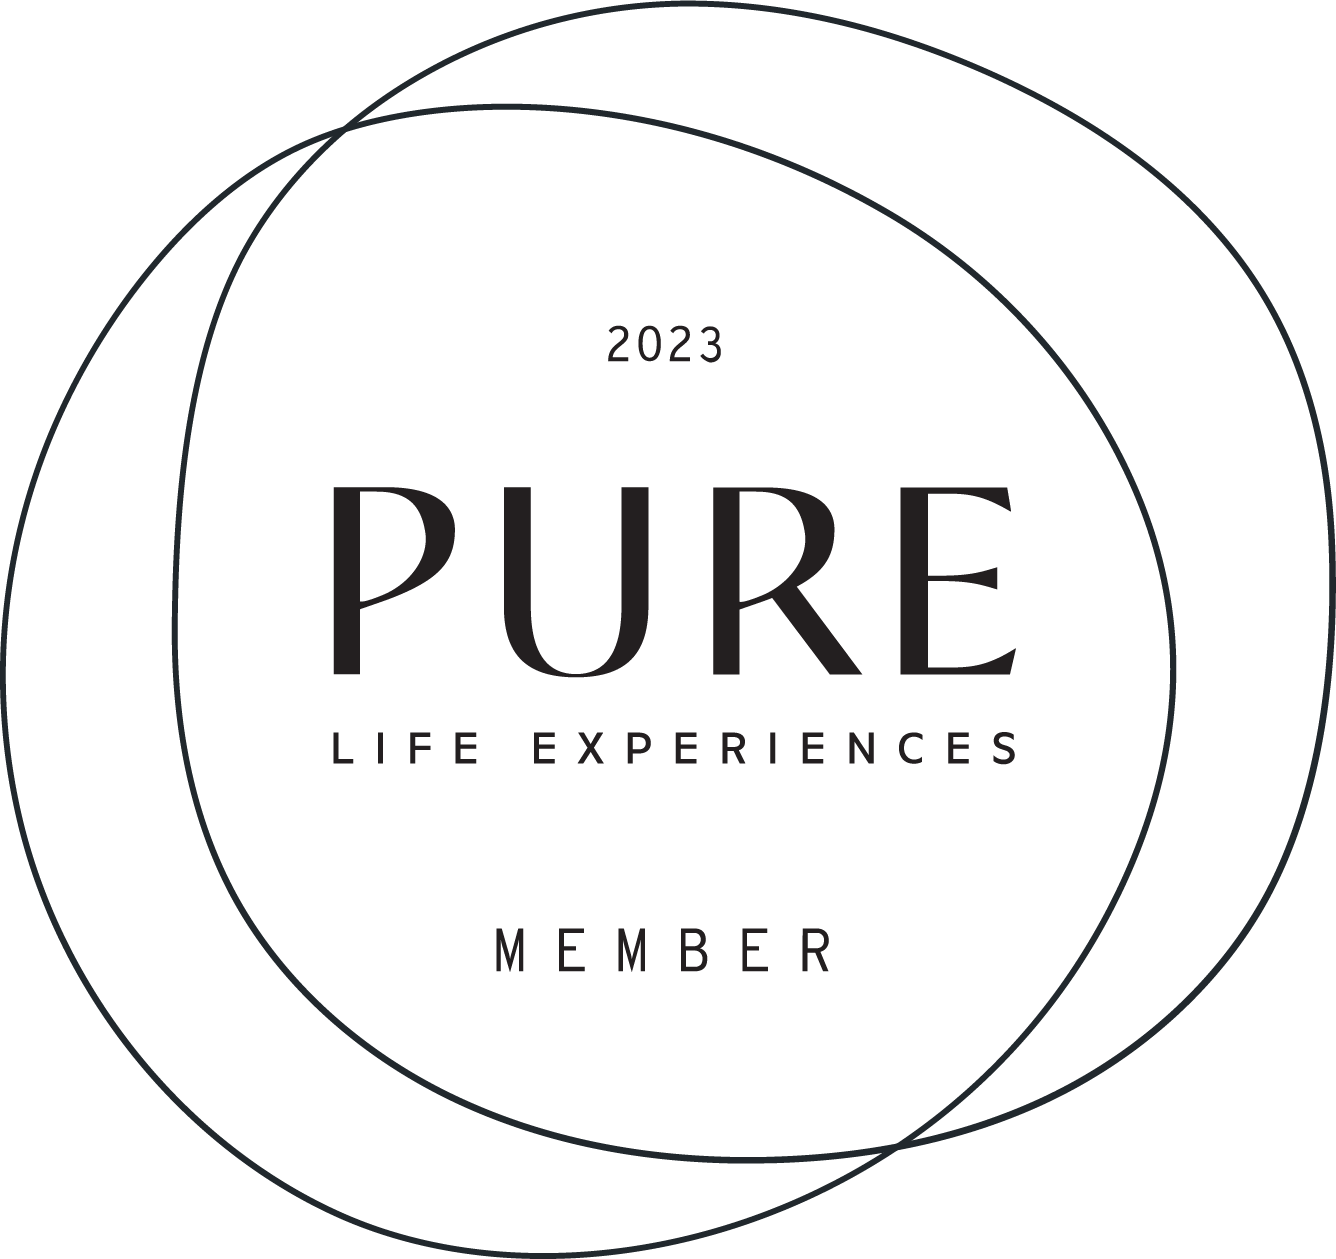 PURE-Life-Experiences-Member-Badge-Takims-Holidays-2023.png